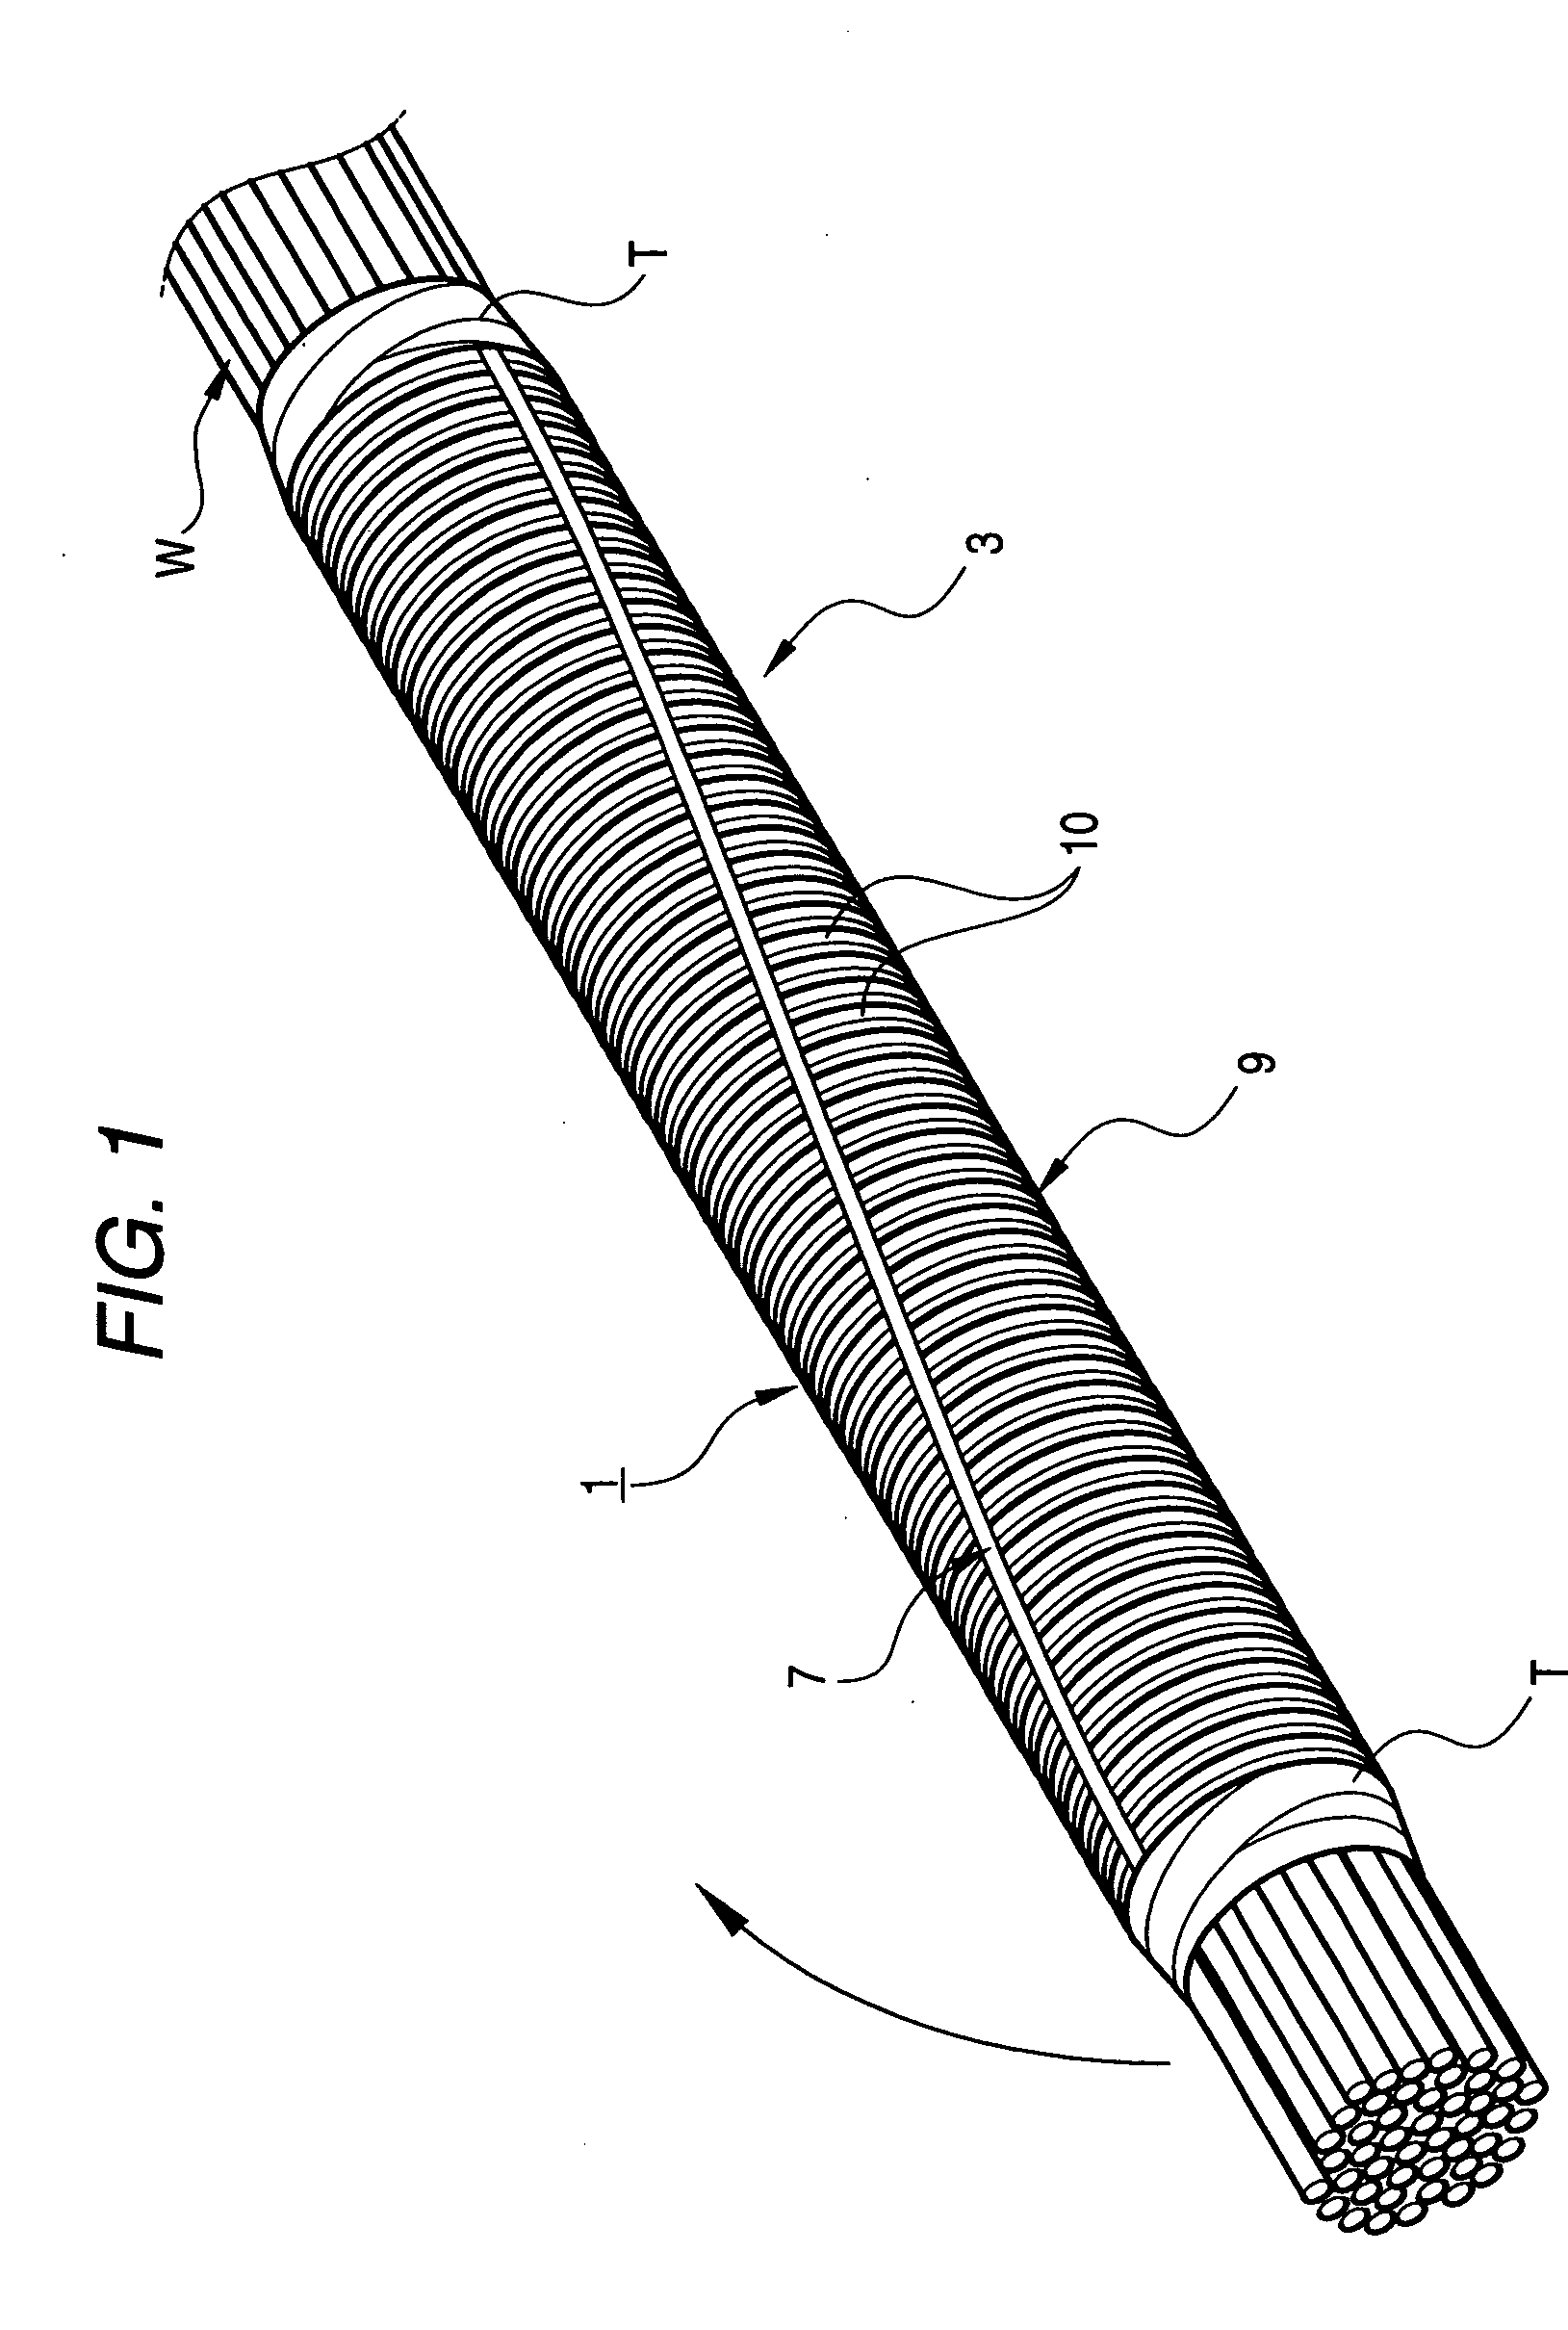 Corrugated tube-mounting structure